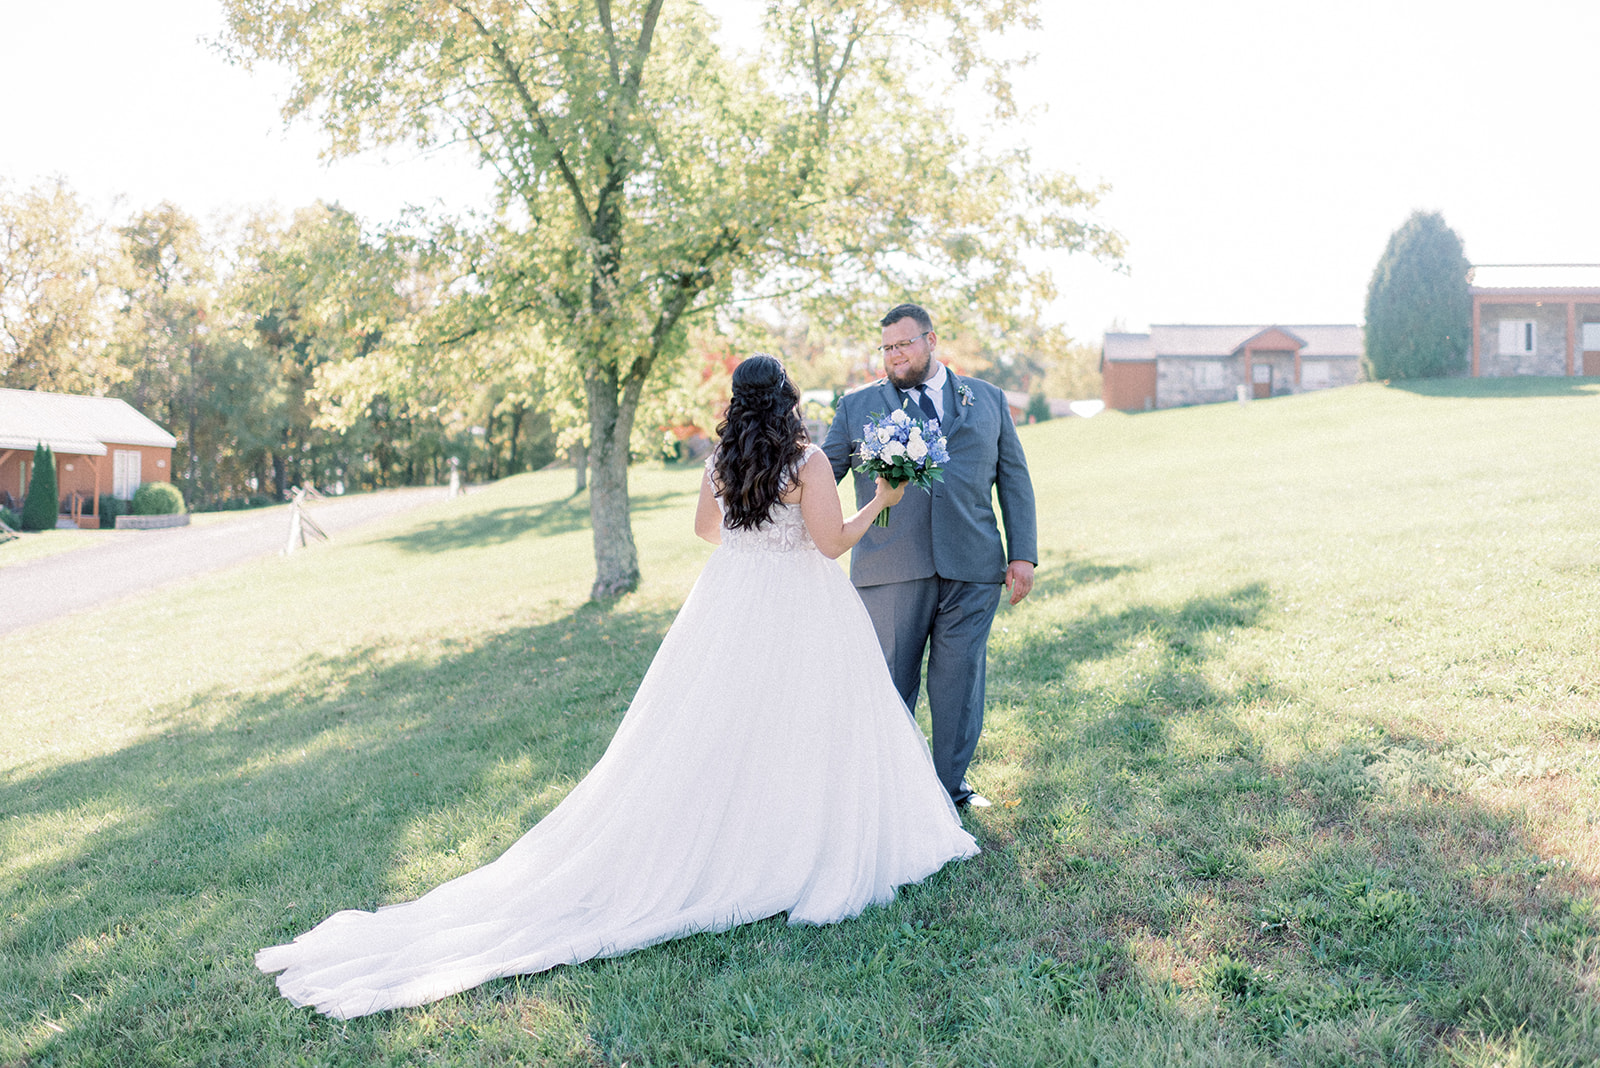 Pennsylvania wedding photographer captures bride and groom seeing one another for first time on wedding day